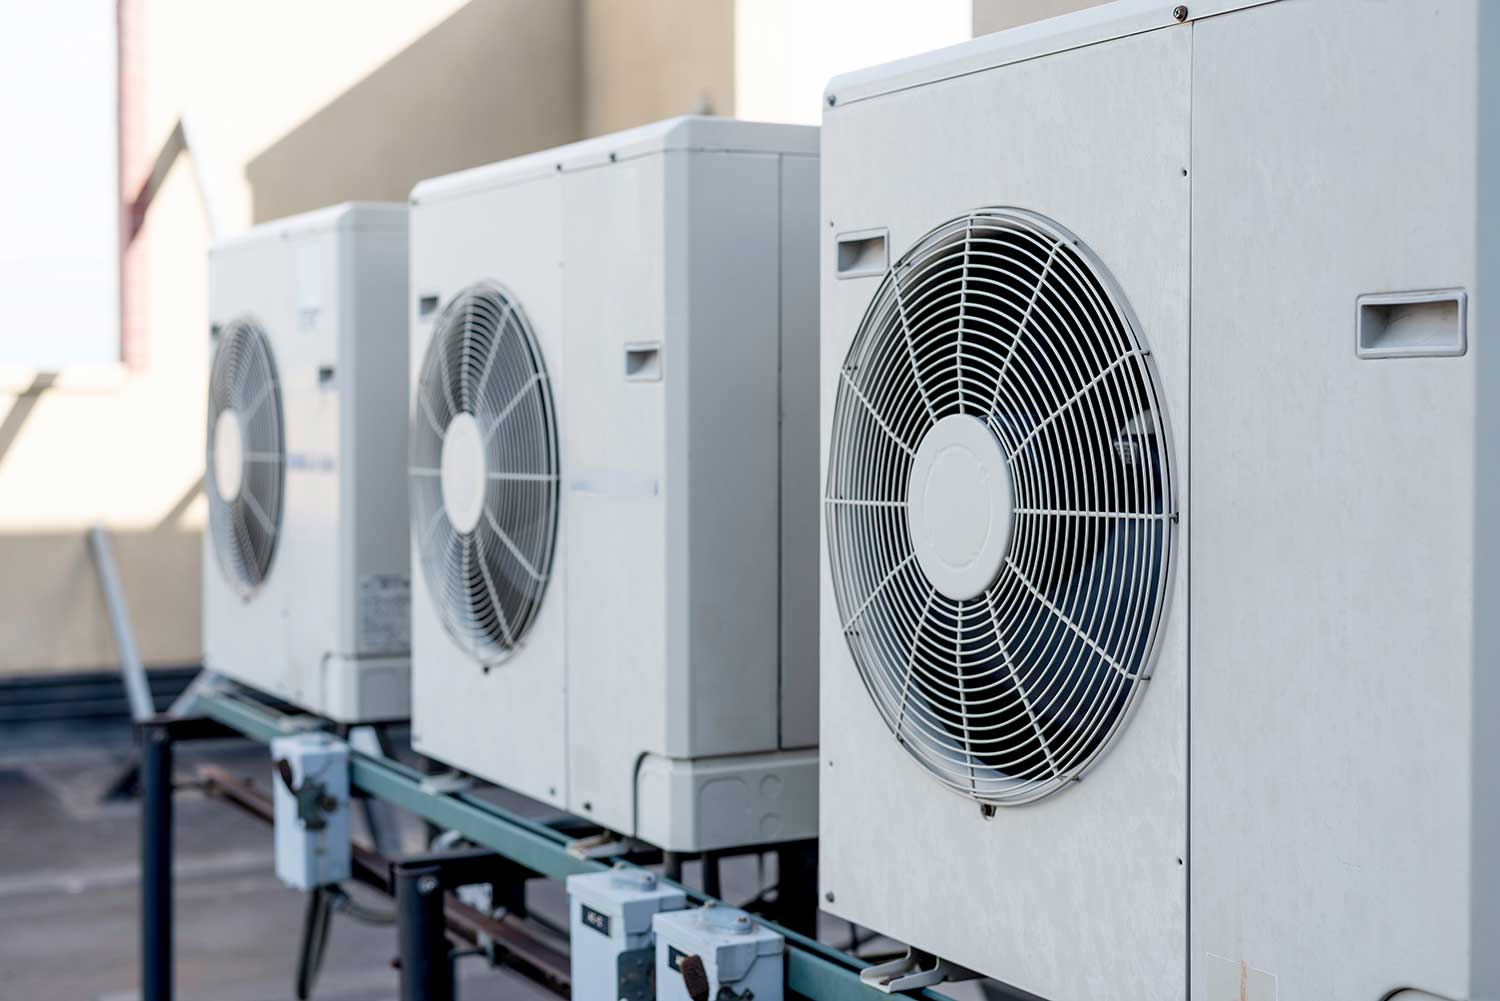 Getting proactive for summer time Heating, Ventilation, plus A/C savings